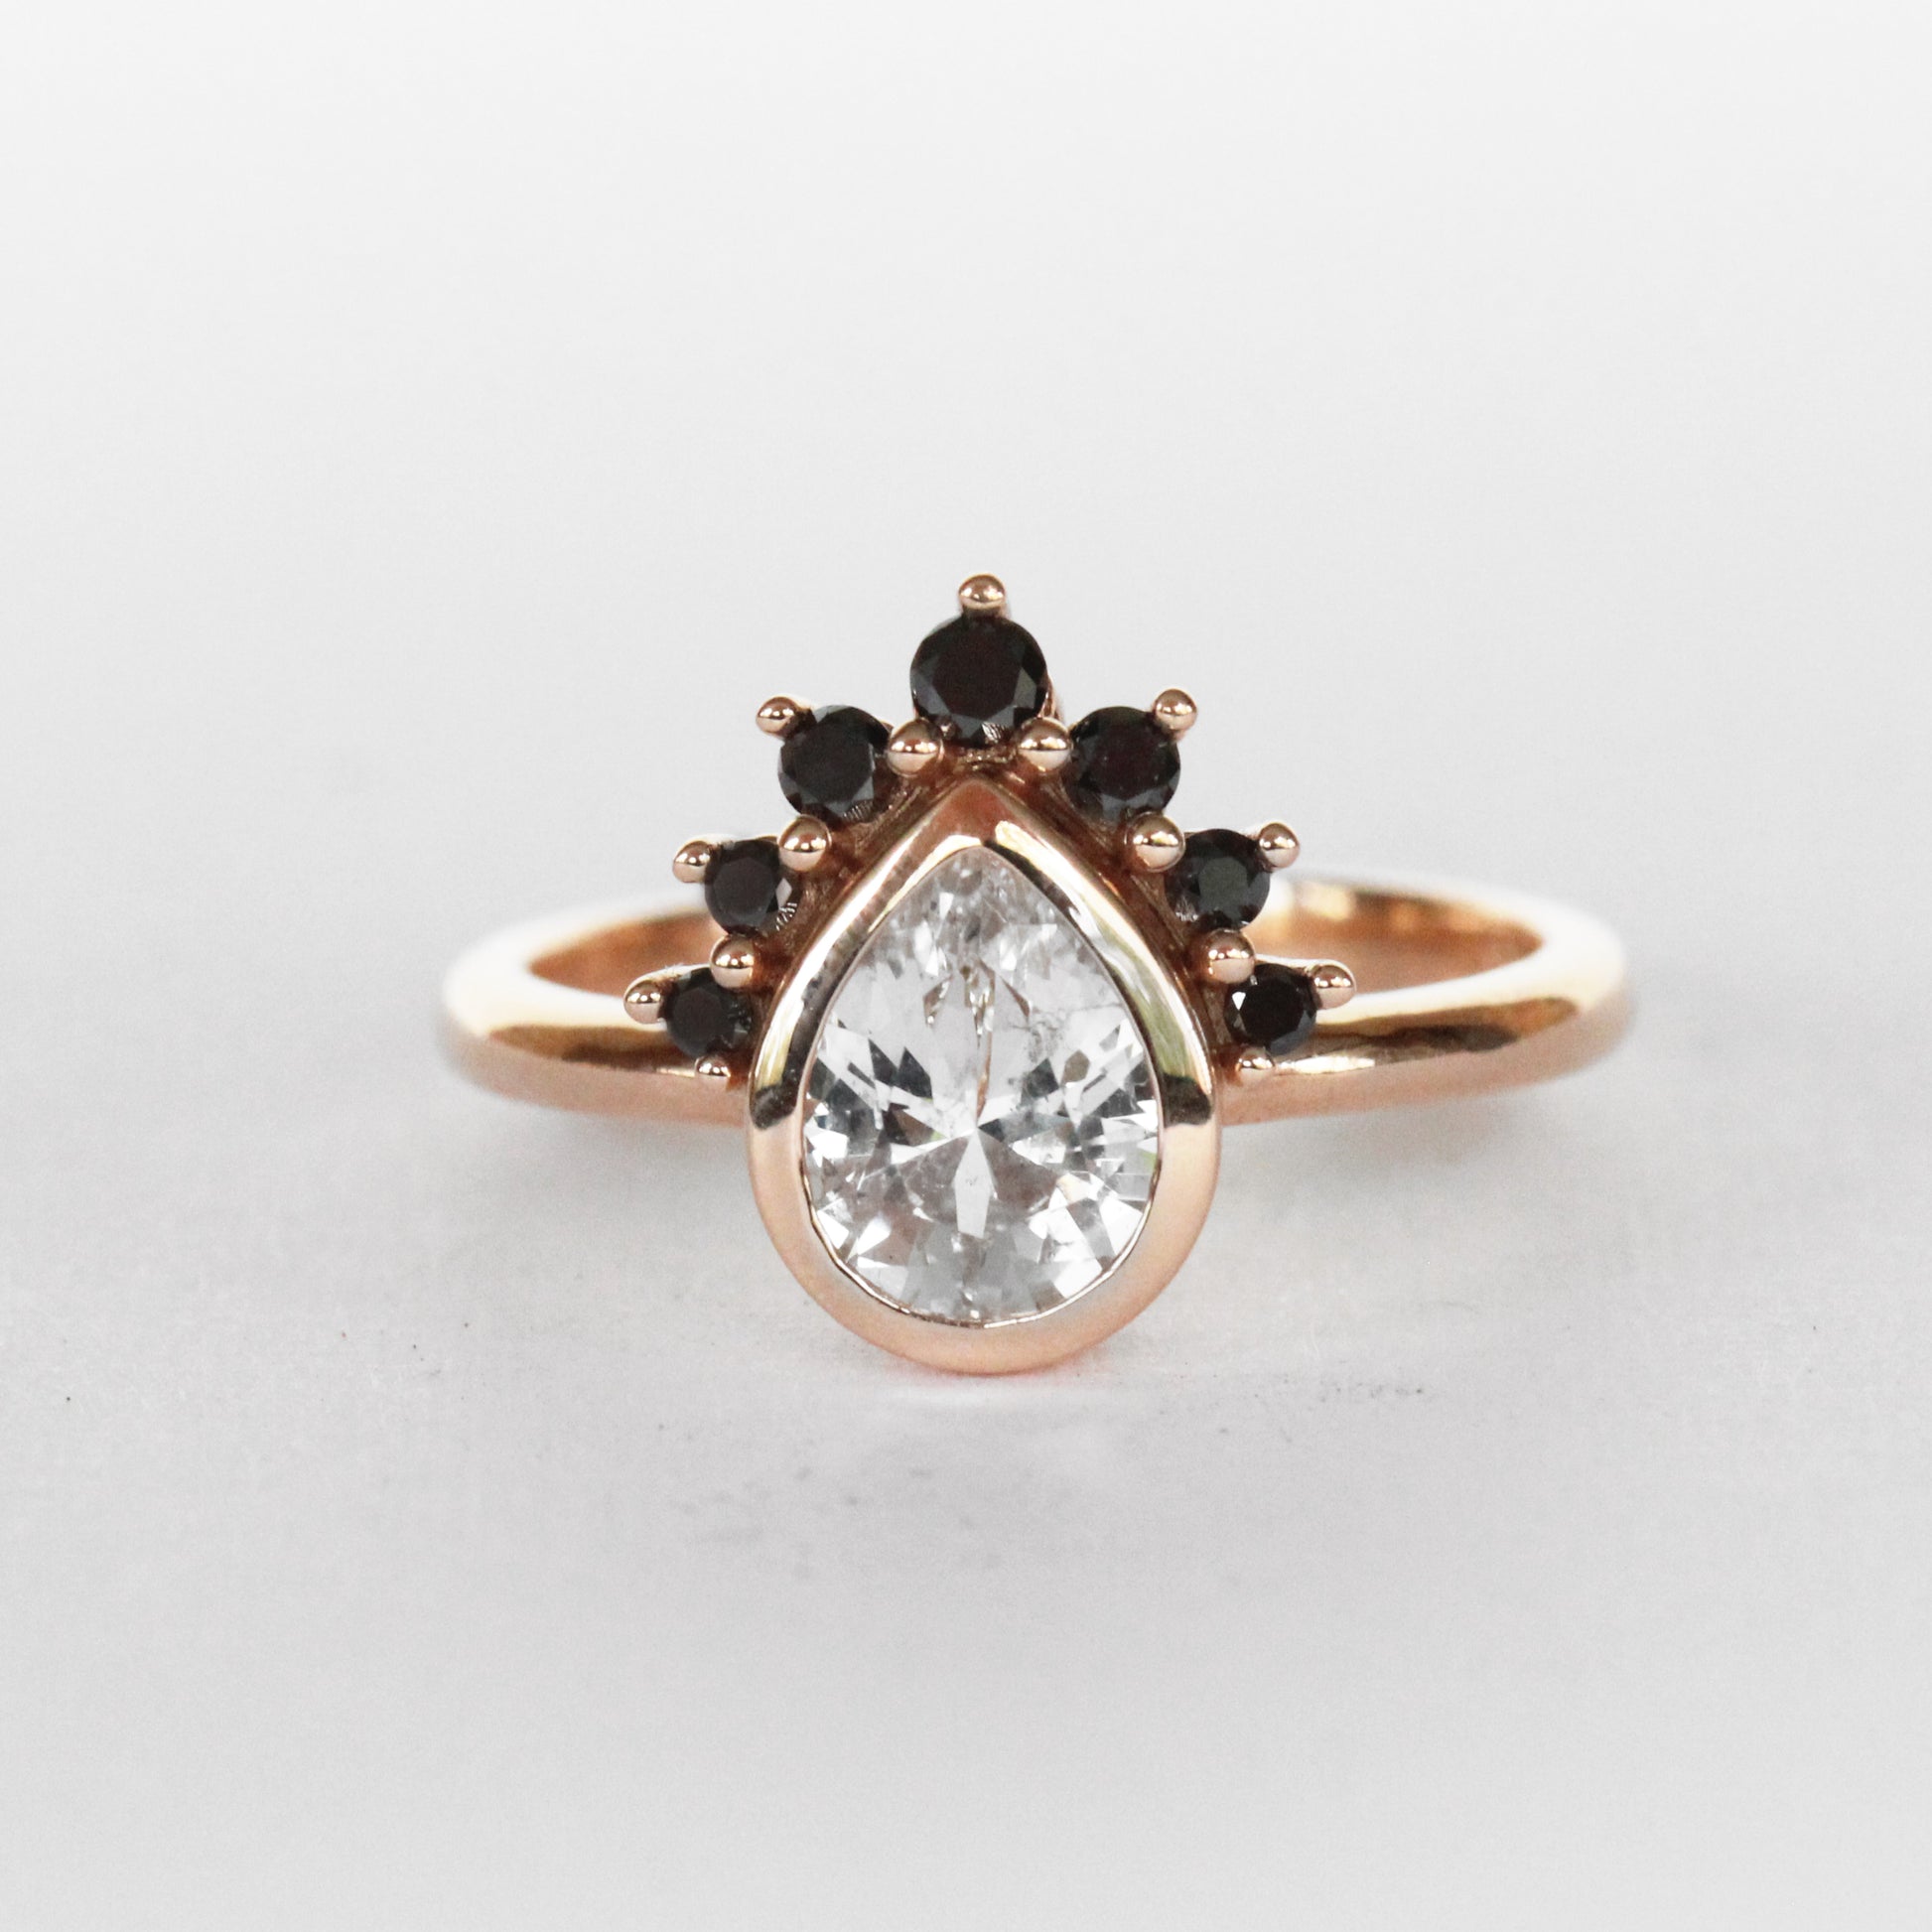 Ashlyn Ring with White Sapphire and Black Diamonds in 14k Gold - Midwinter Co. Alternative Bridal Rings and Modern Fine Jewelry